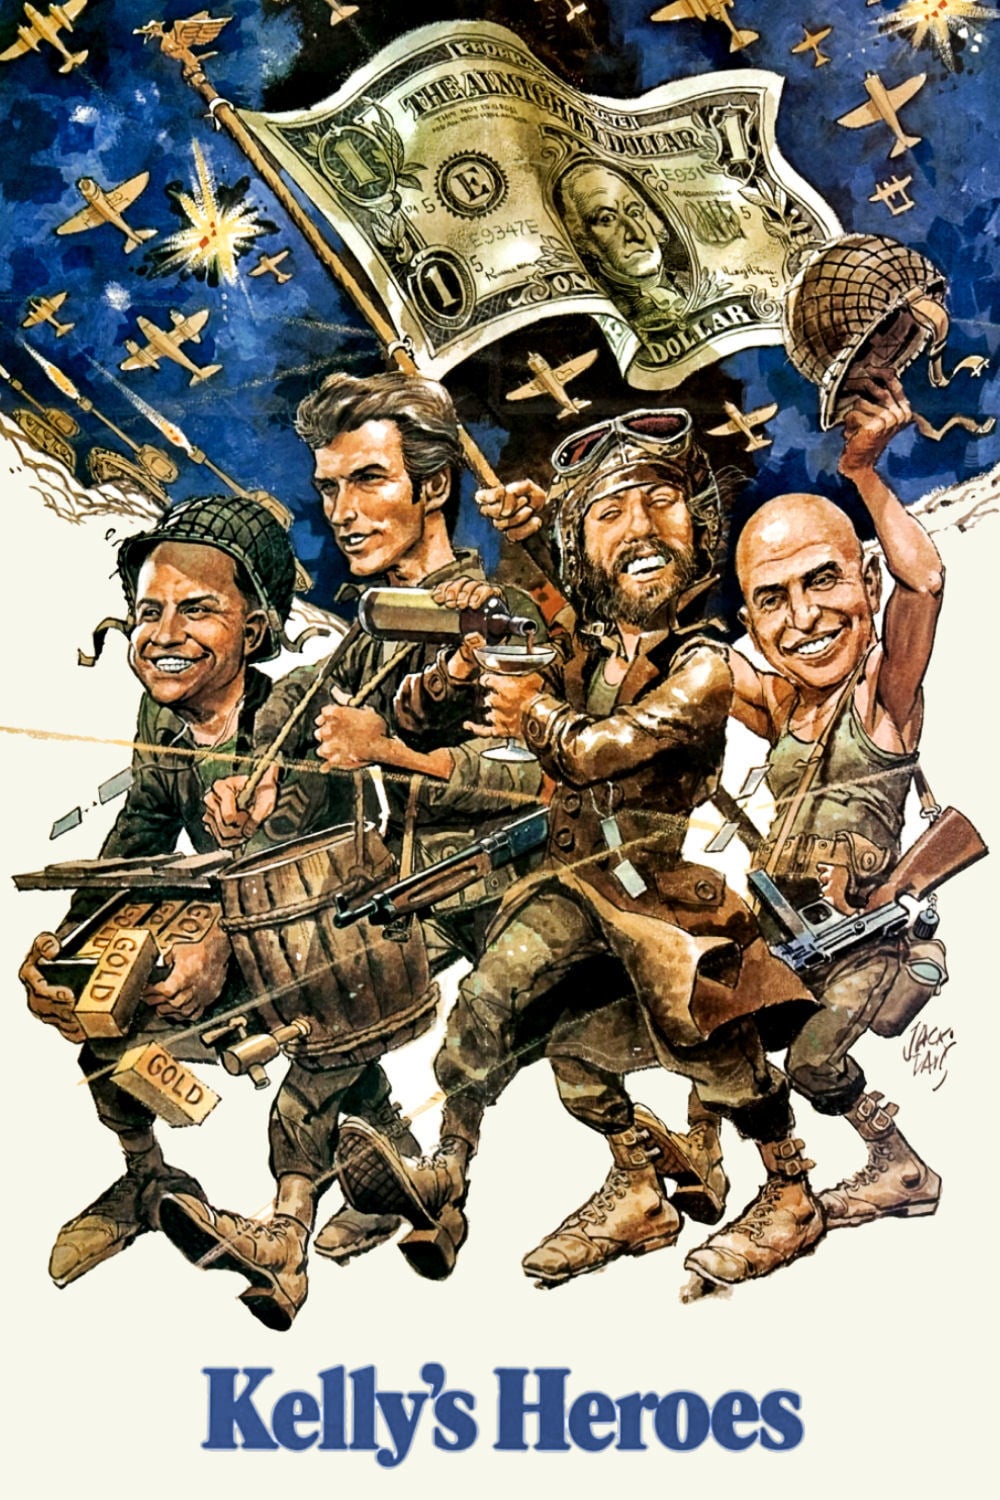 Poster for the movie "Kelly's Heroes"